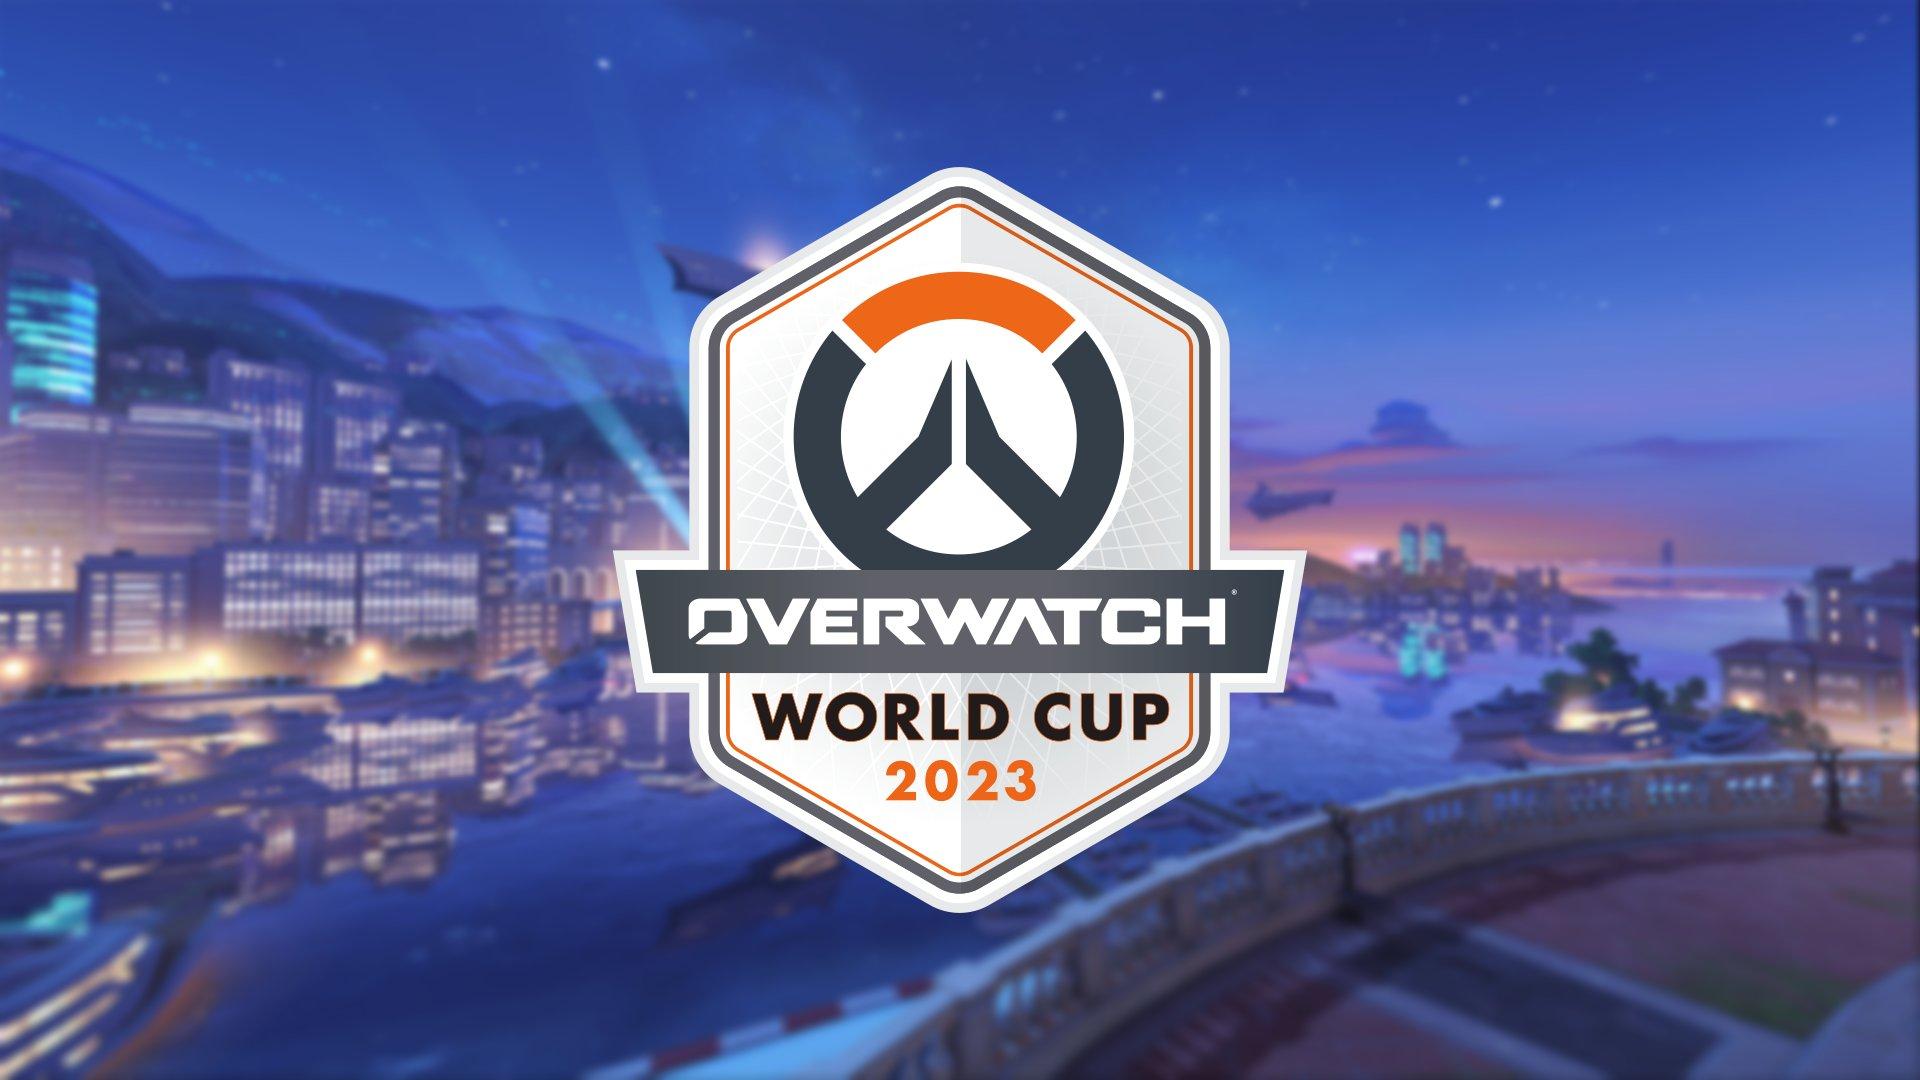 Saudi Arabia upsets China to win Overwatch World Cup 2023: Final results -  Dexerto